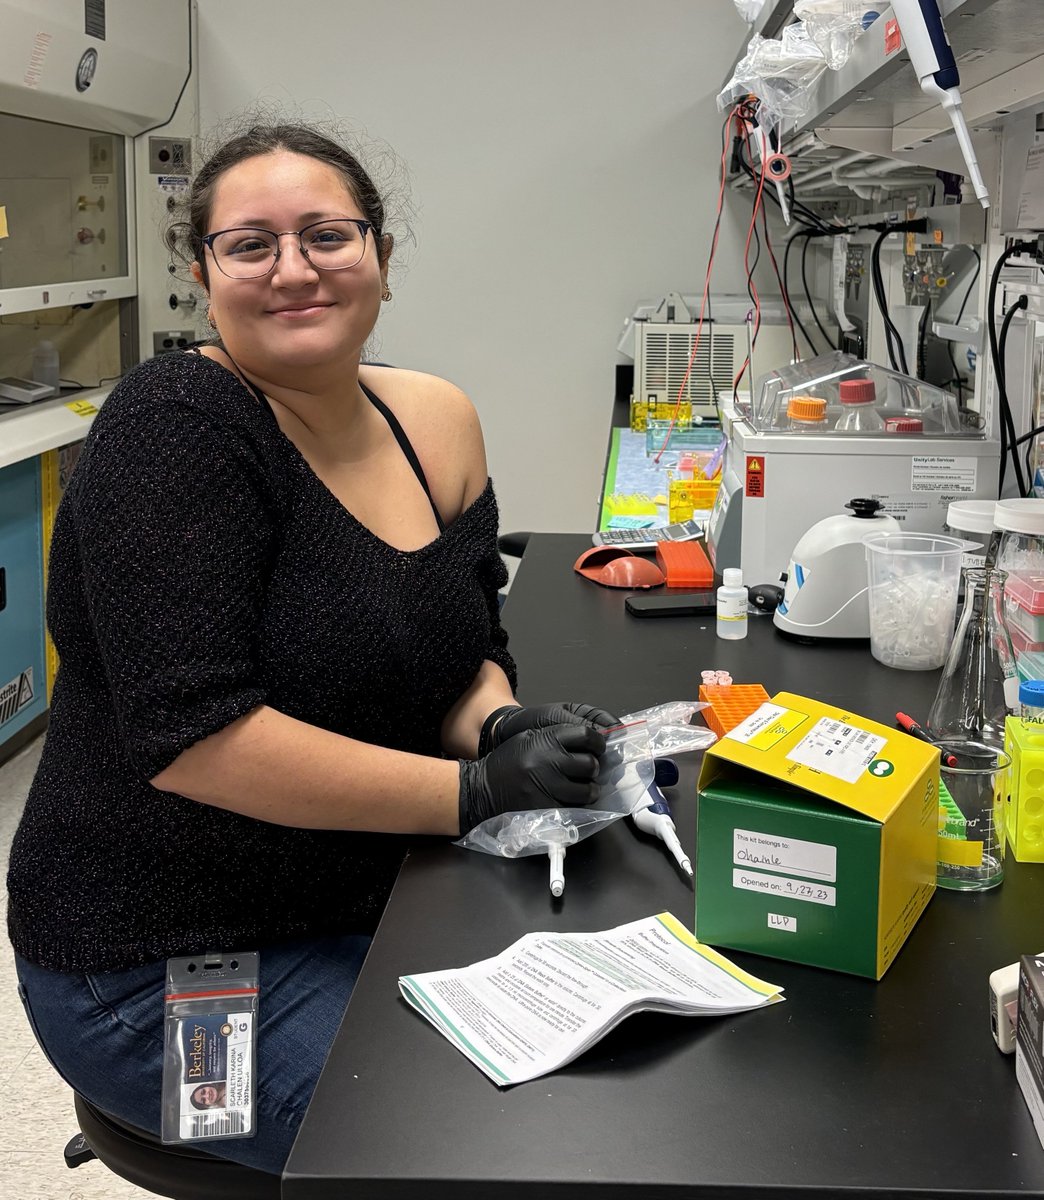 The Ohainle Lab is excited to welcome @berkeleyMCB students Jinna Brim (@jinnabrim) and Scarleth Challen Ulloa to the lab for rotations this spring. Welcome Jinna and Scarleth!